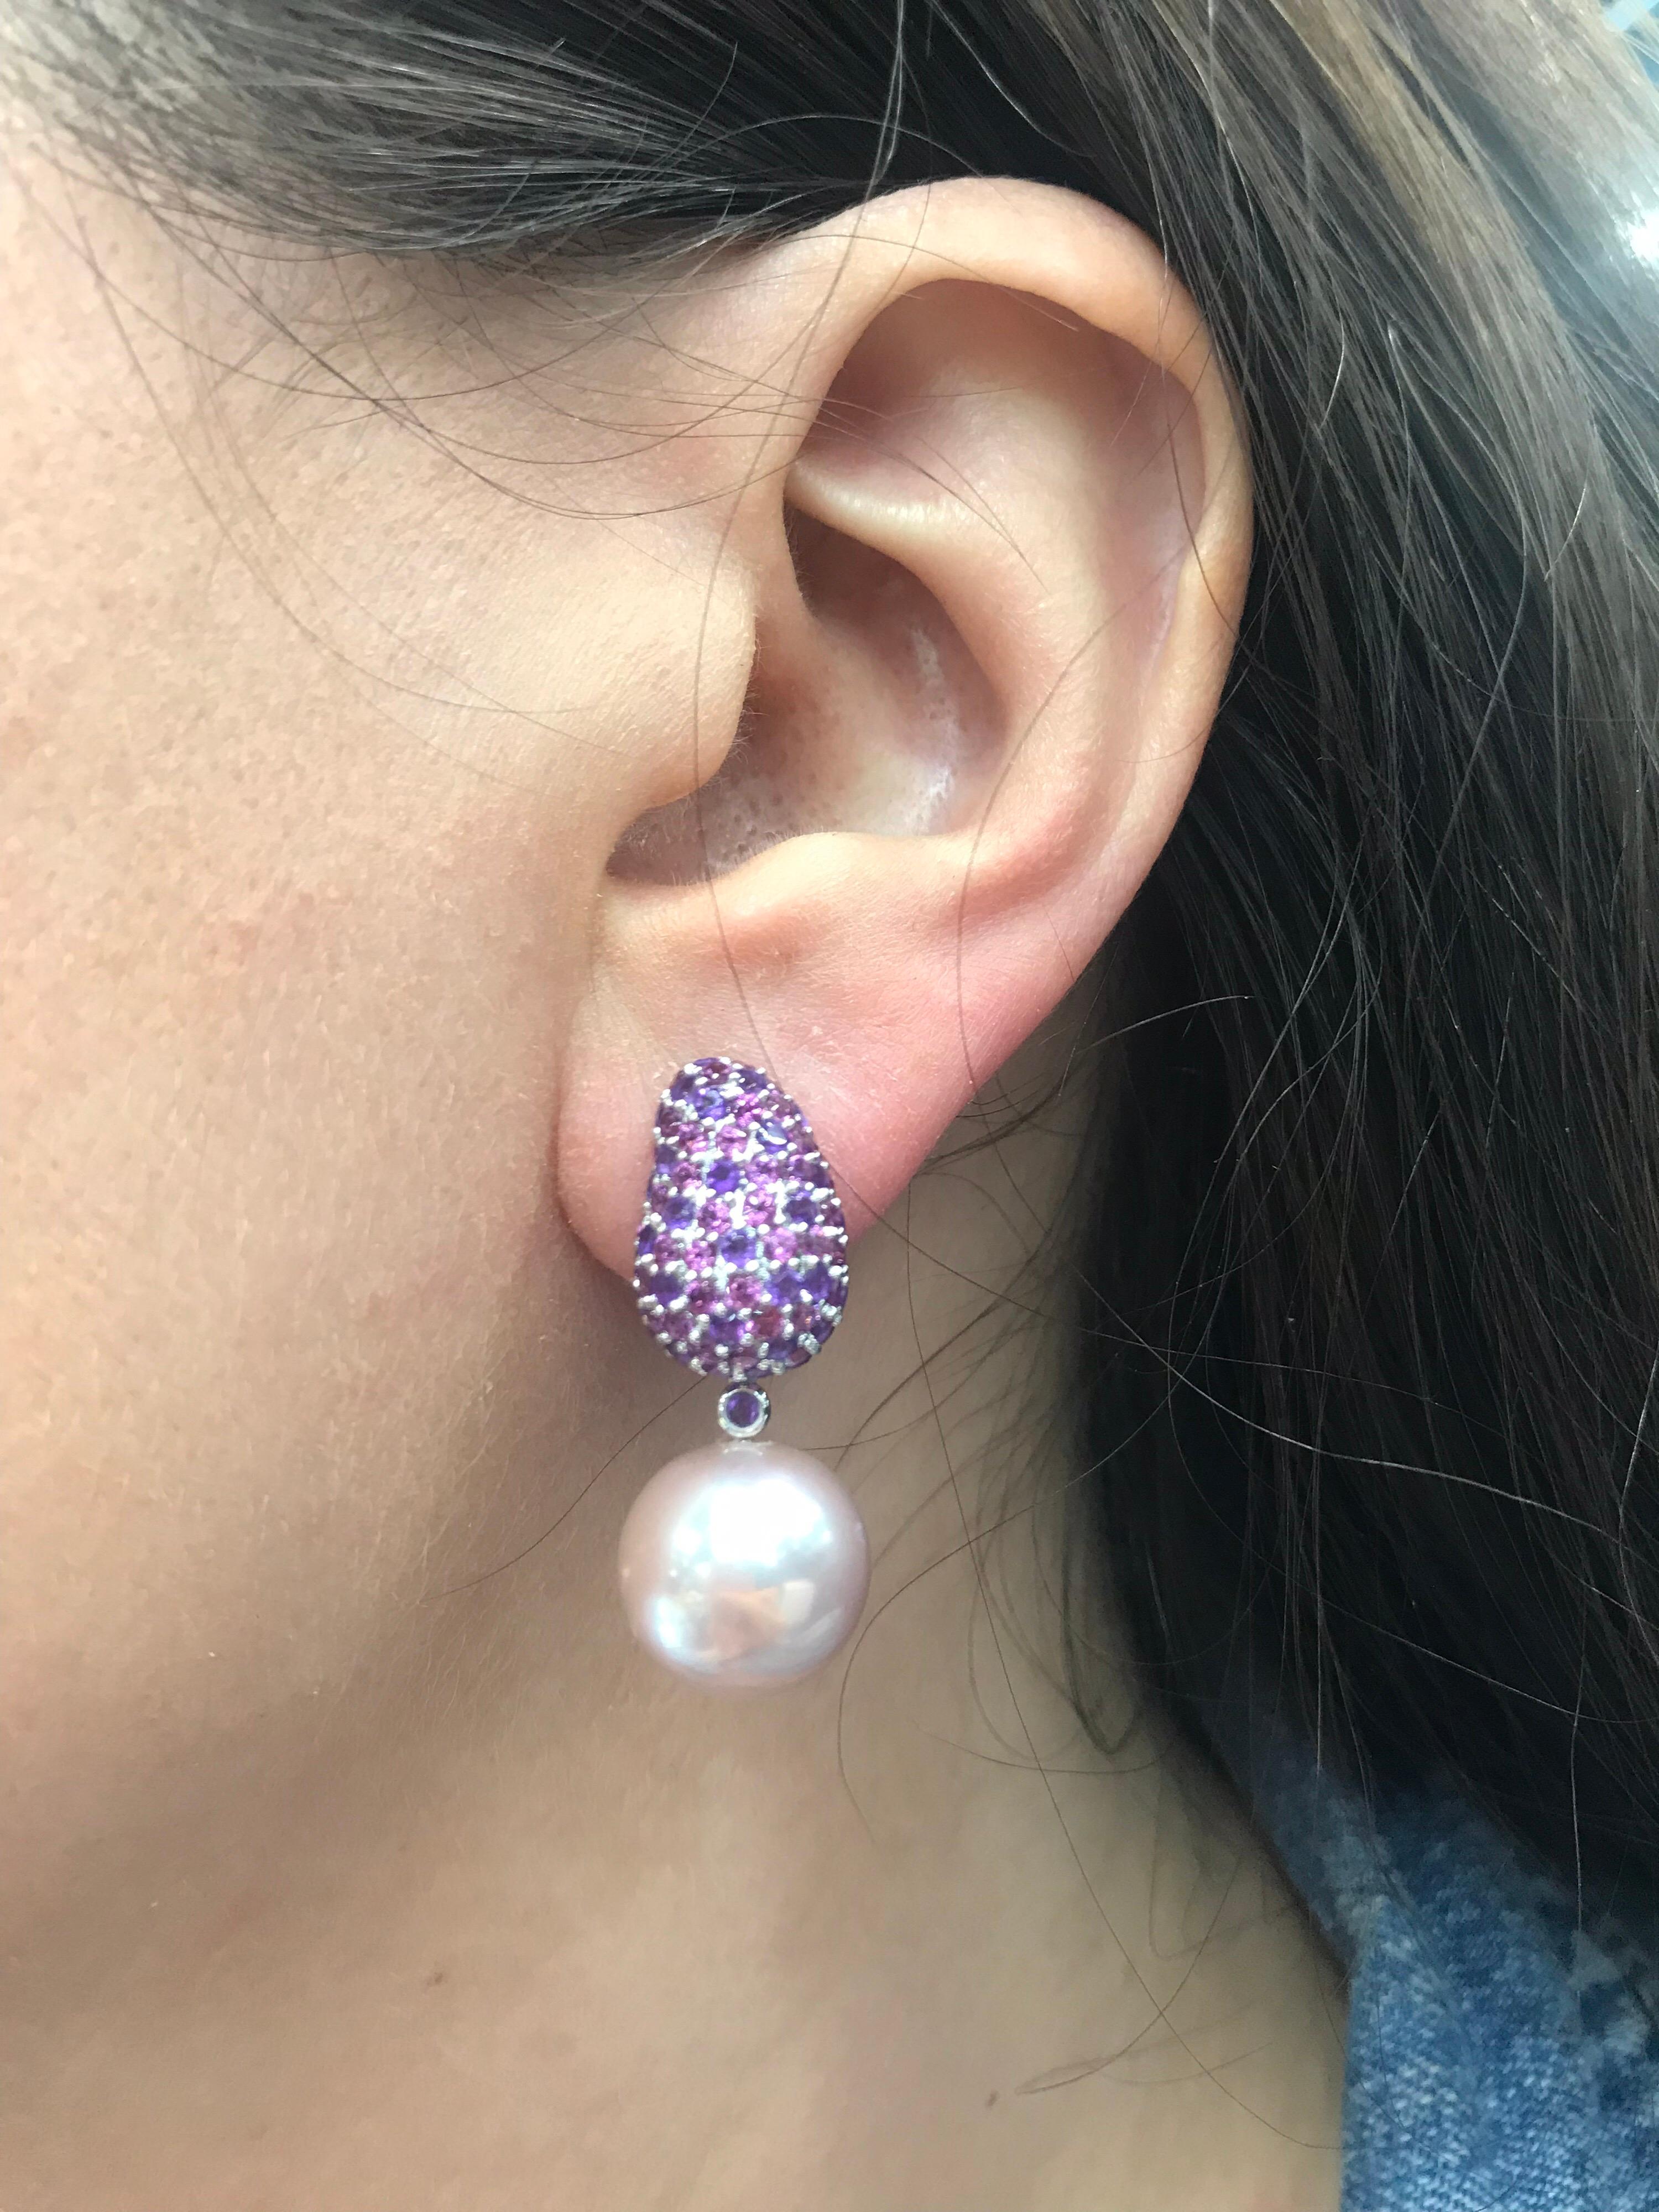 18K White gold drop earrings featuring rhodolite & amethyst weighing 4 carats with two Pink Freshwater pearls measuring 12-13 mm. 